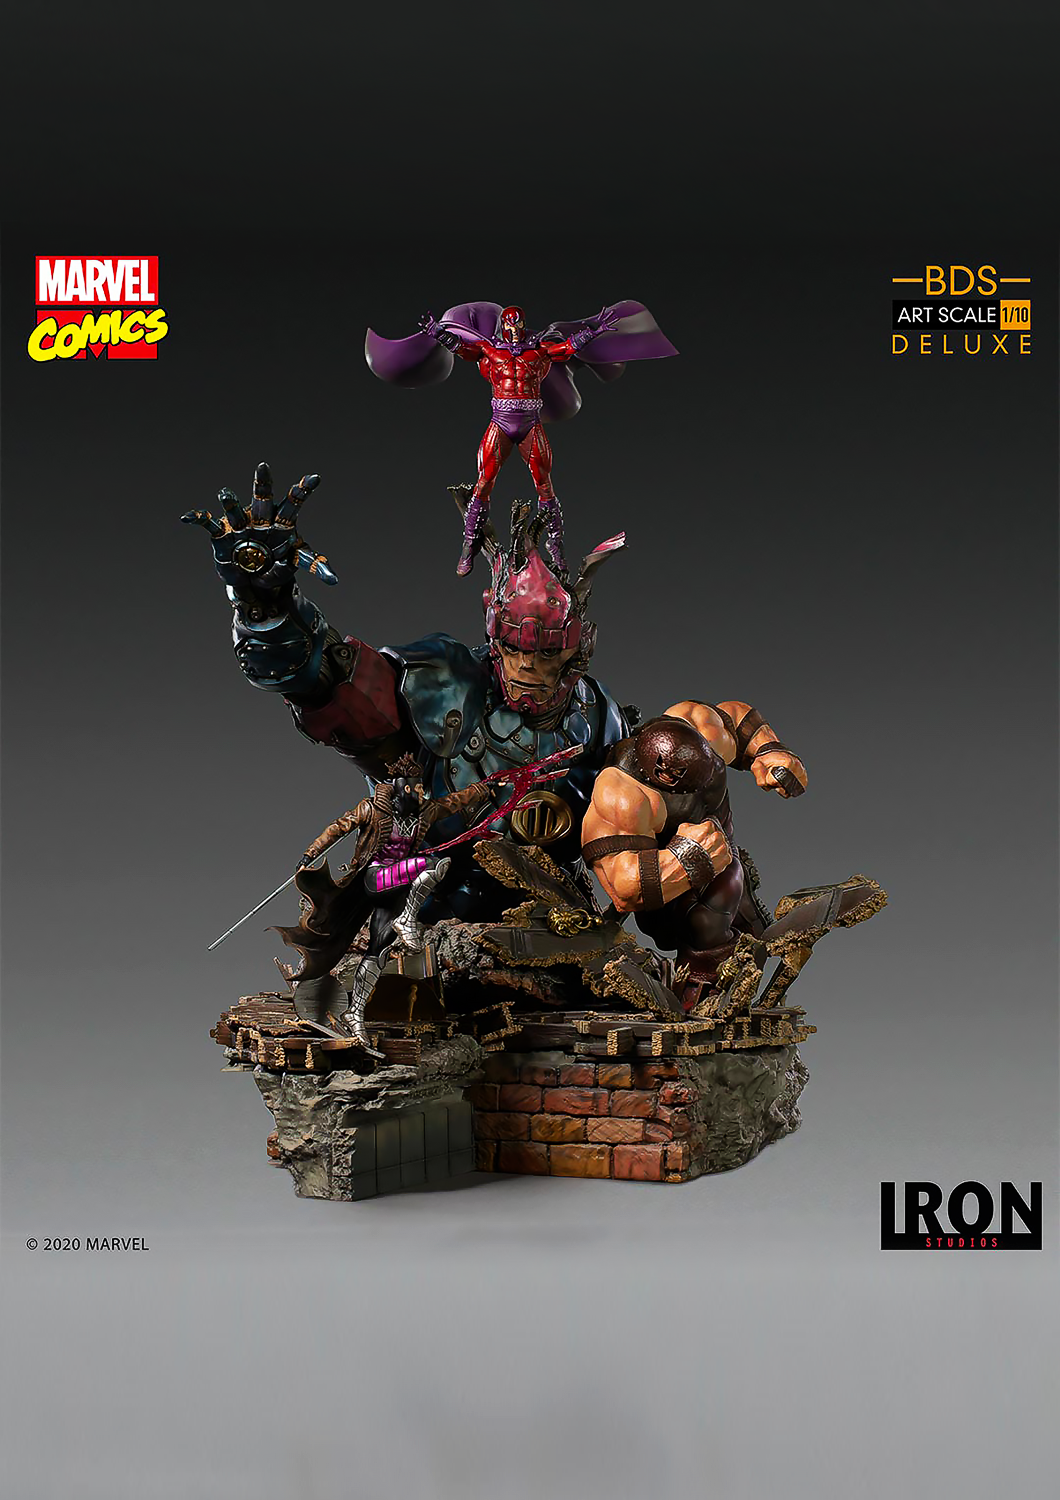 IRON STUDIOS MARVEL COMICS SENTINEL 2 DELUXE BDS ART SCALE 1/10 MARCAS26520-10 - Anotoys Collectibles